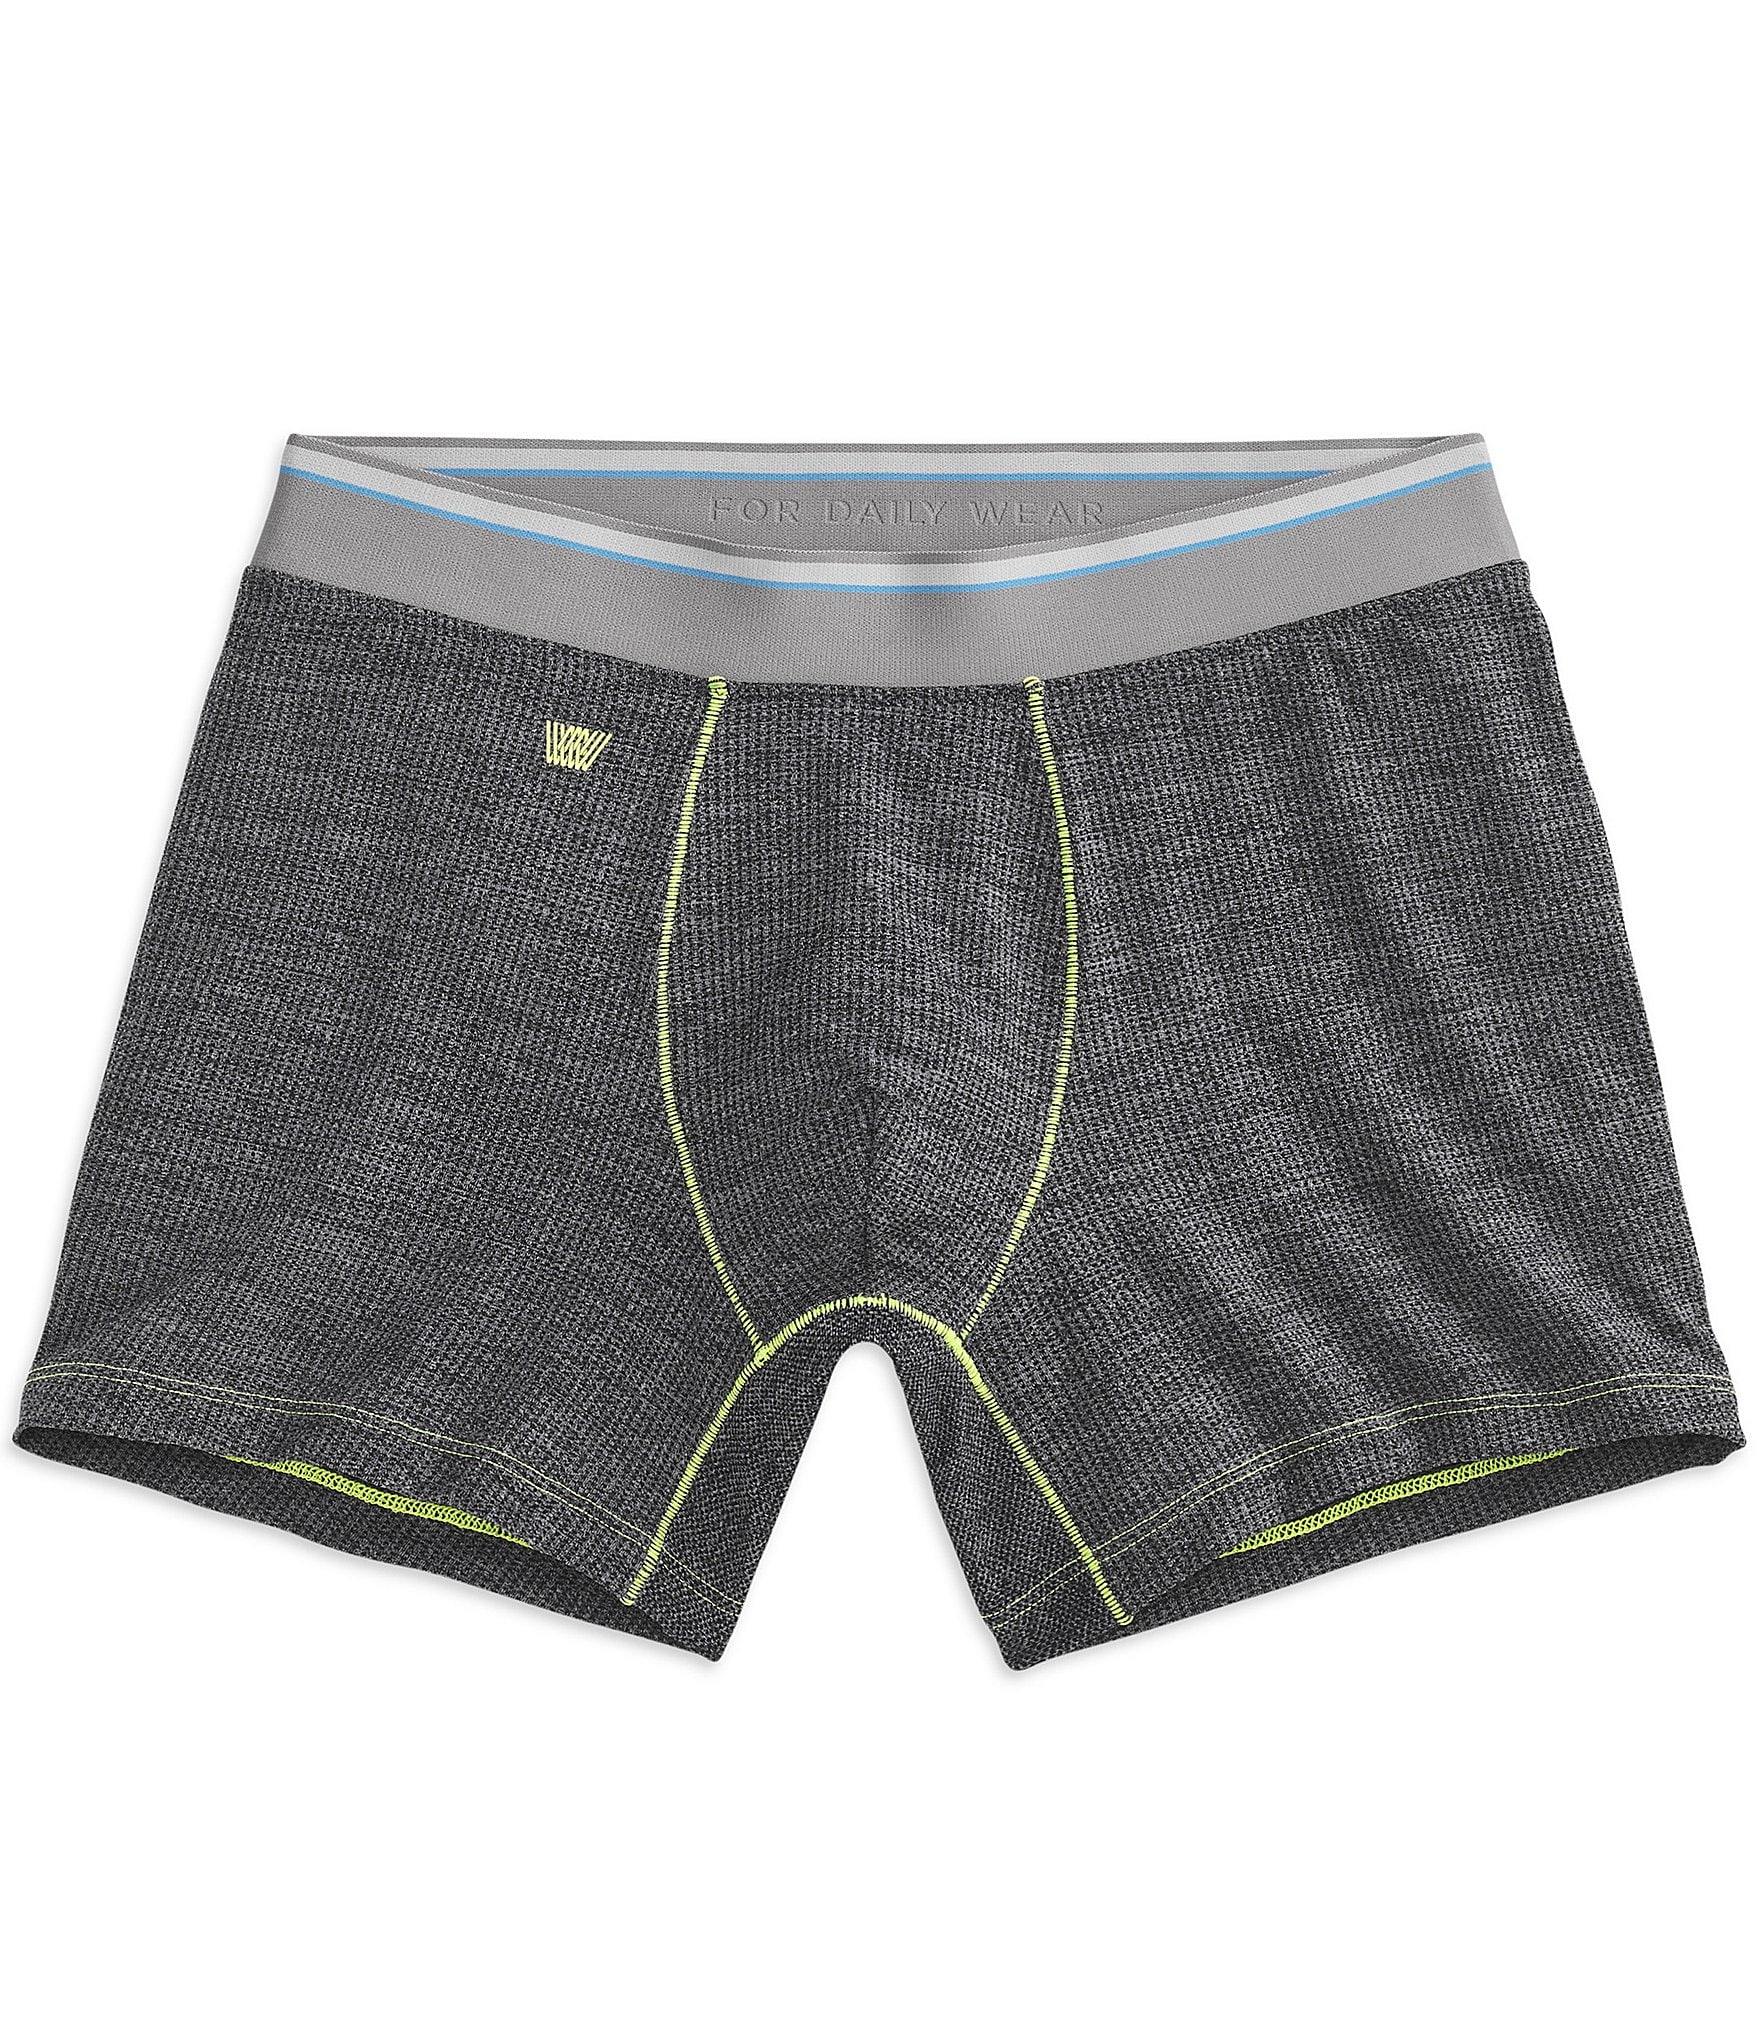 Mack Weldon's Most Popular Boxer Briefs Are Back in Stock Now